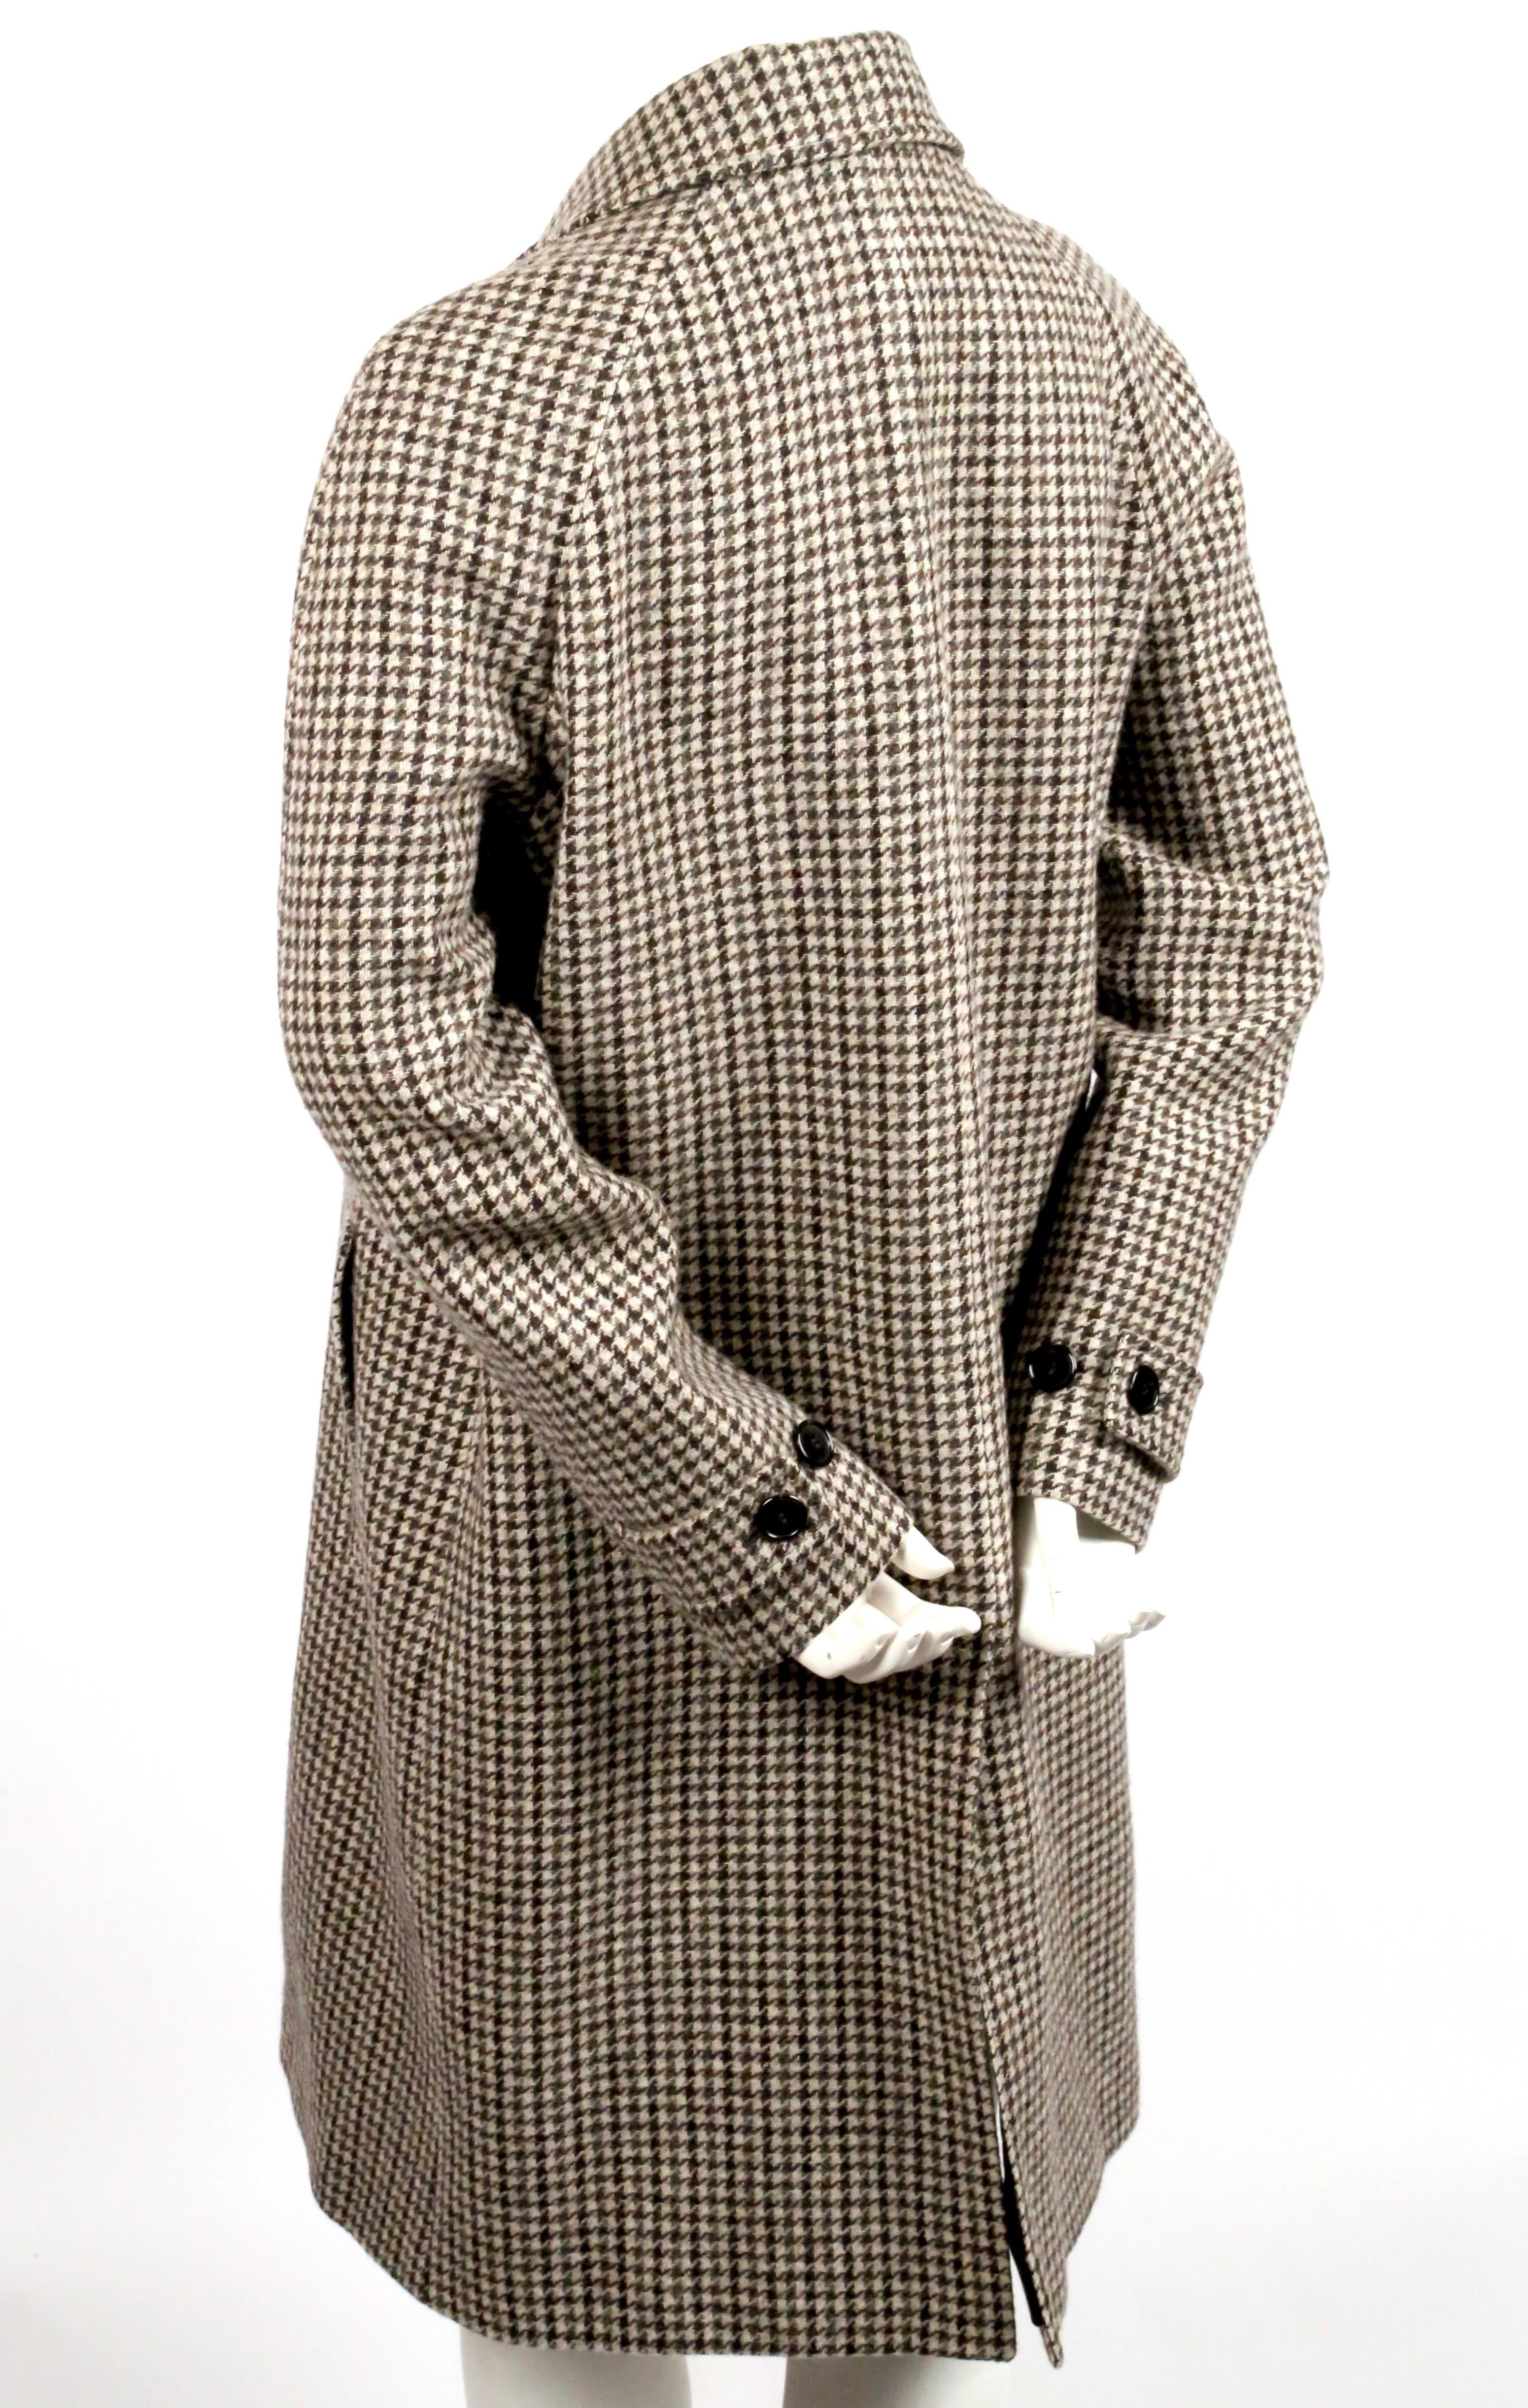 Taupe and grey houndstooth woven wool overcoat by Saint Laurent dating to fall of 2014. Same coat seen on the runway in a different fabric. French size 40. Approximate measurements: 40